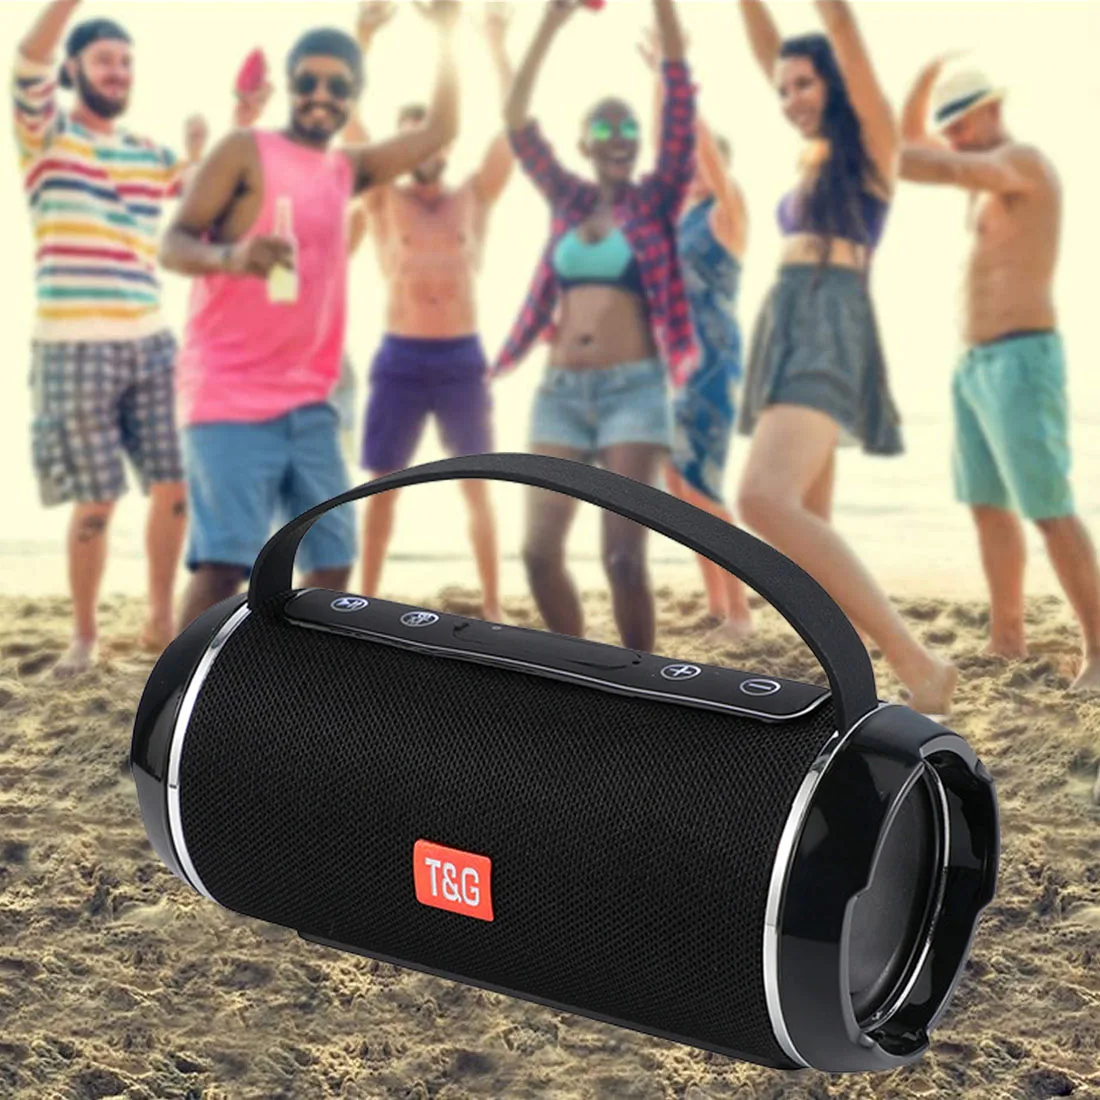 TG116C Wireless Powerful Bluetooth Speaker Box Outdoor Speakers Subwoofer Music Center BoomBox 3D Stereo Radio enlarge